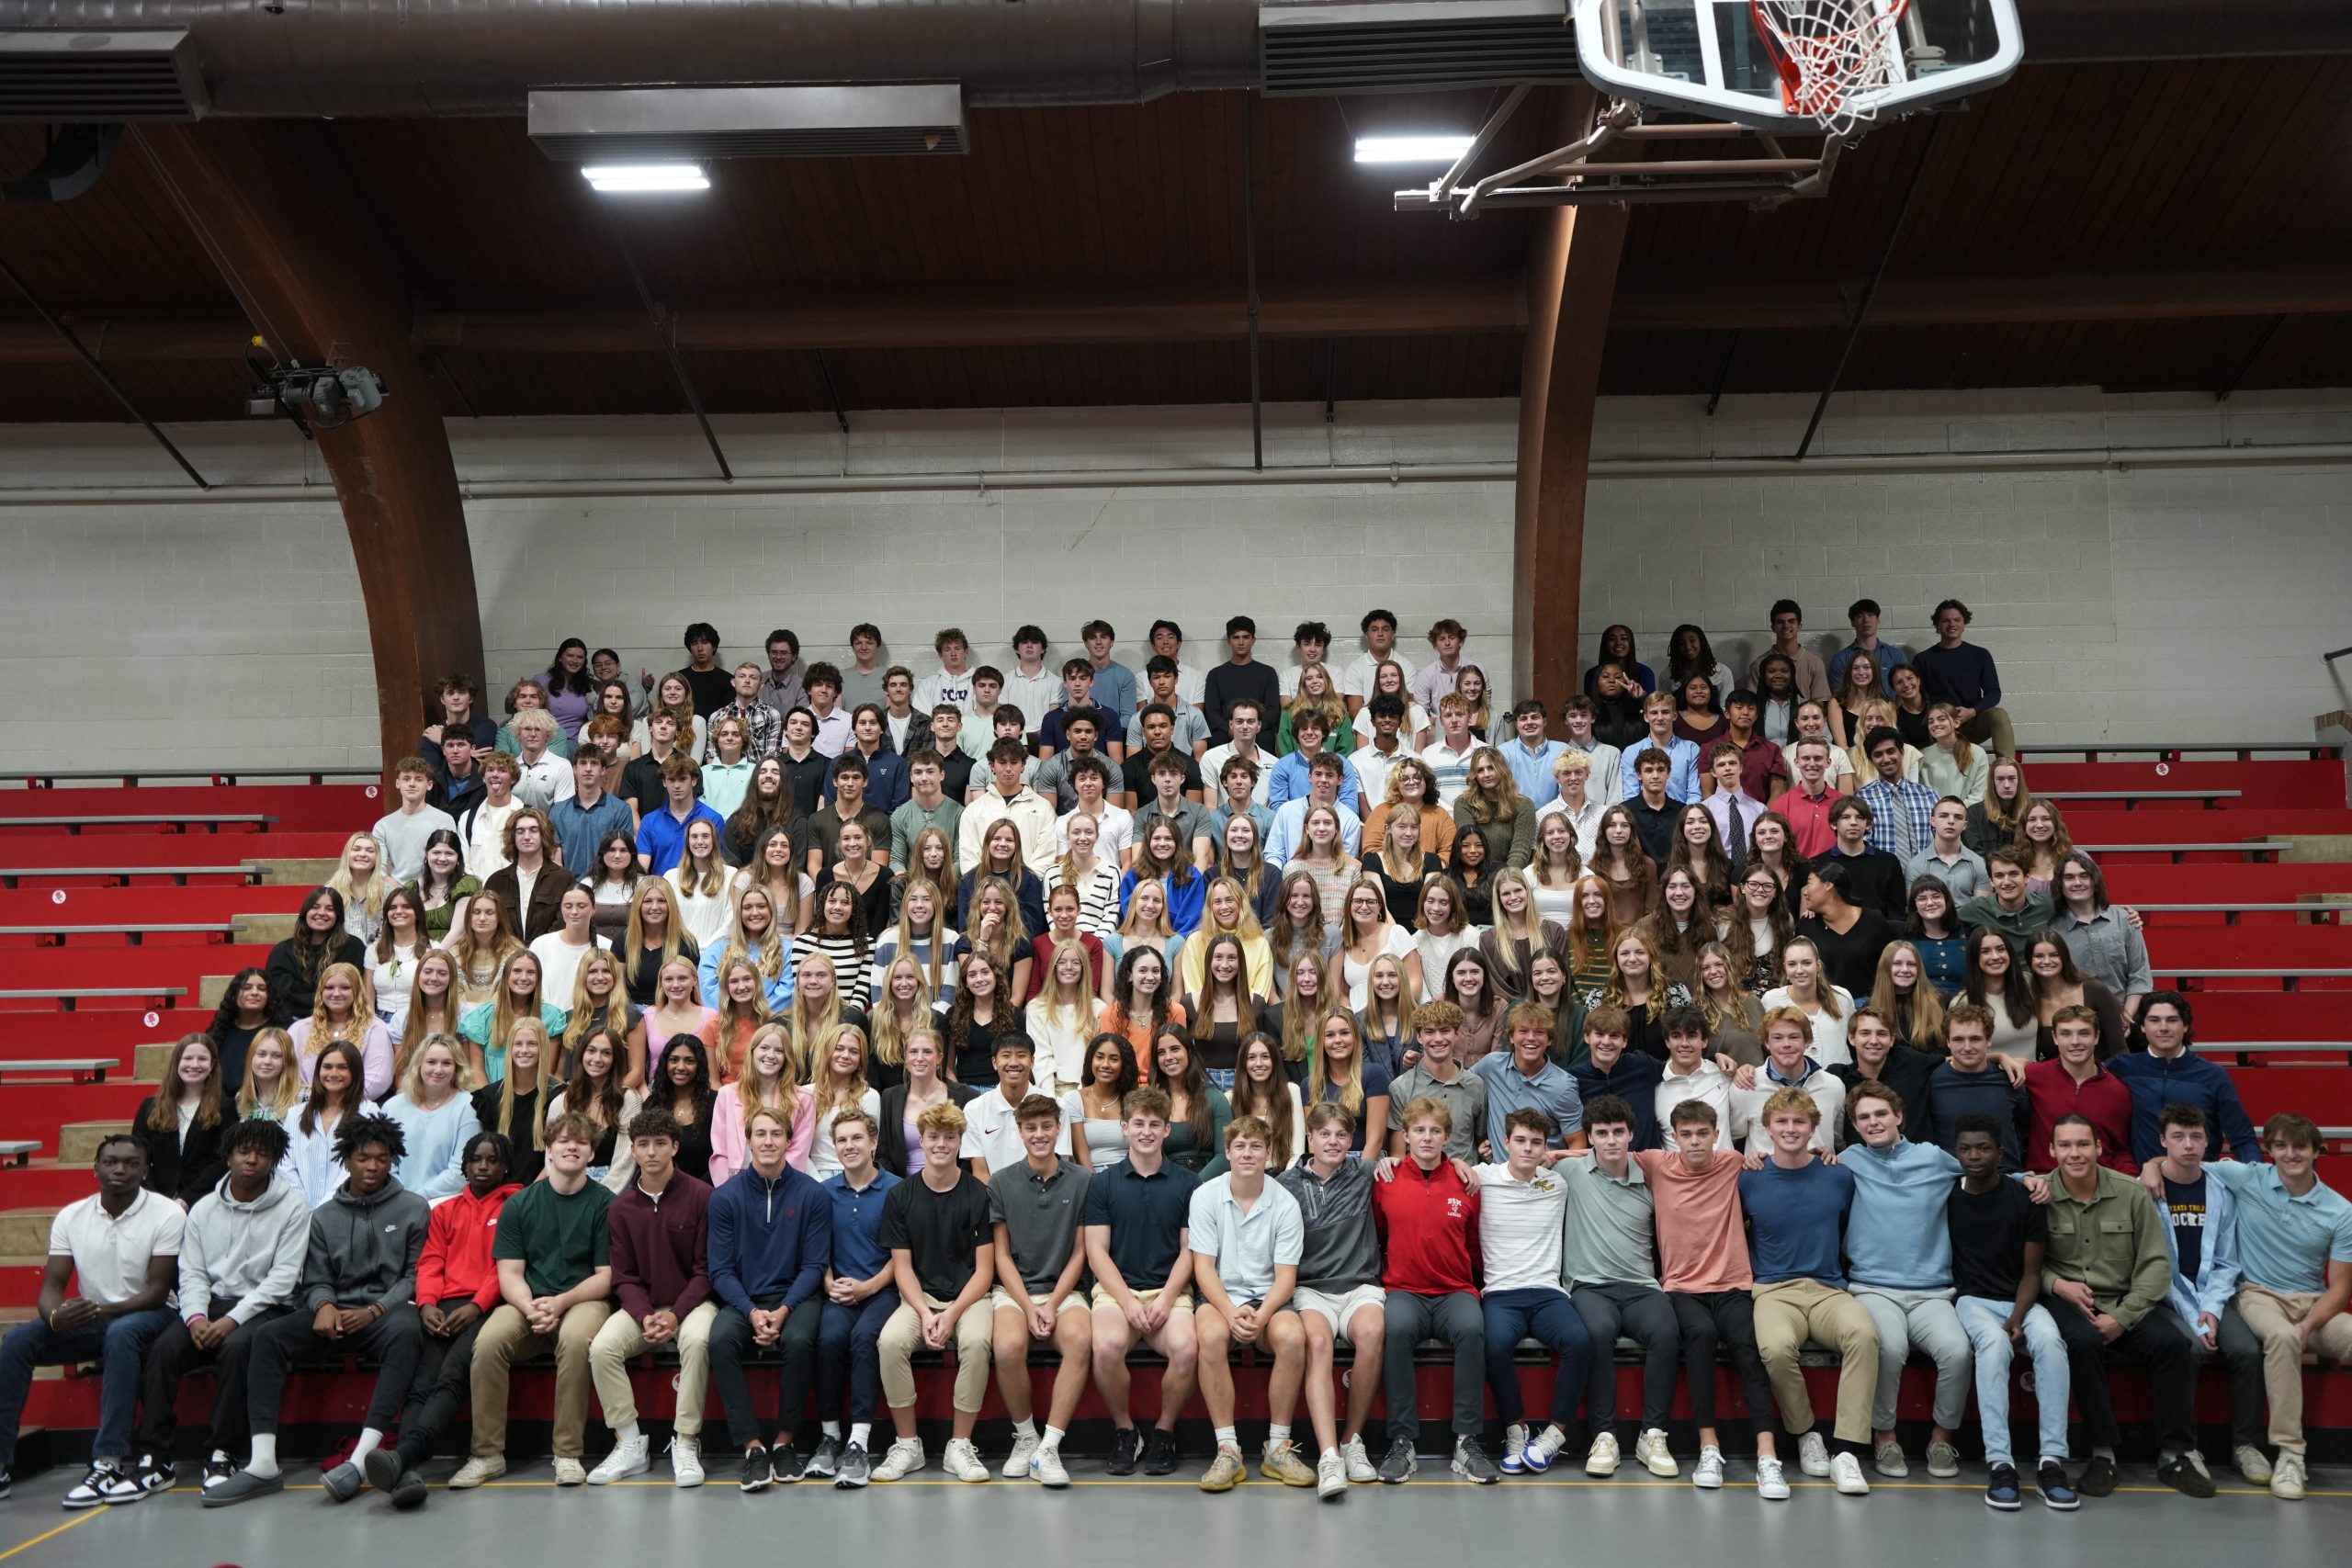 The senior class gathered for their last retreat where they were able to bond with classmates.